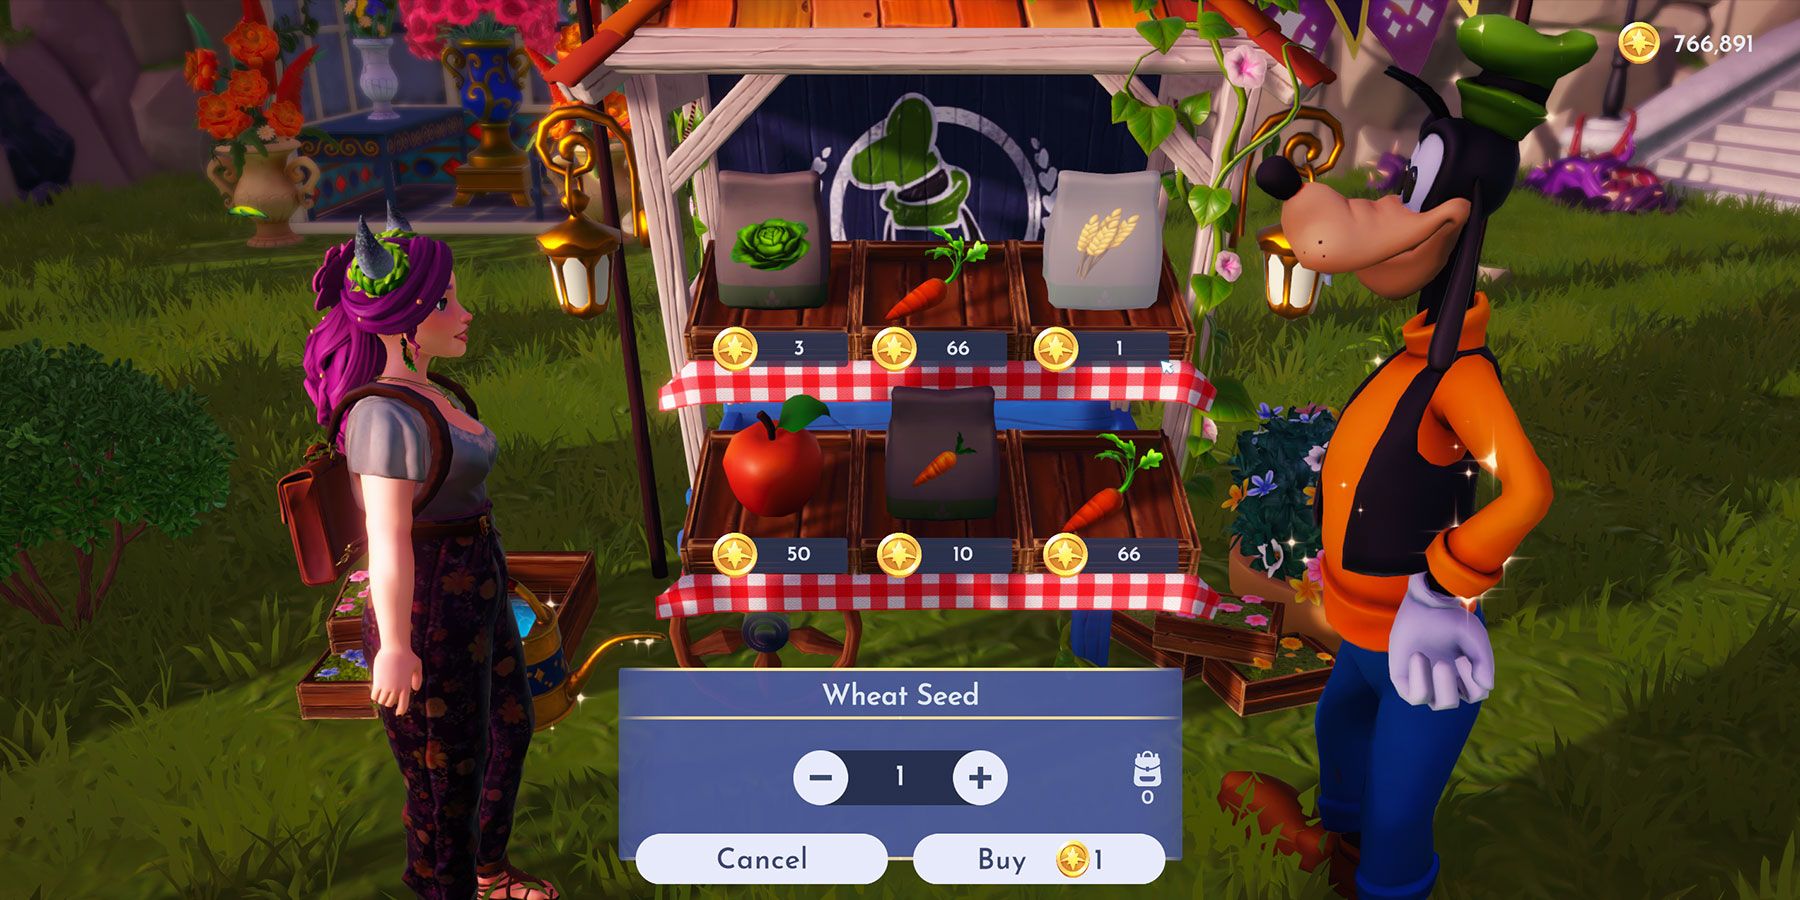 Buying Wheat Seeds from Goofy's Stall in Disney Dreamlight Valley.